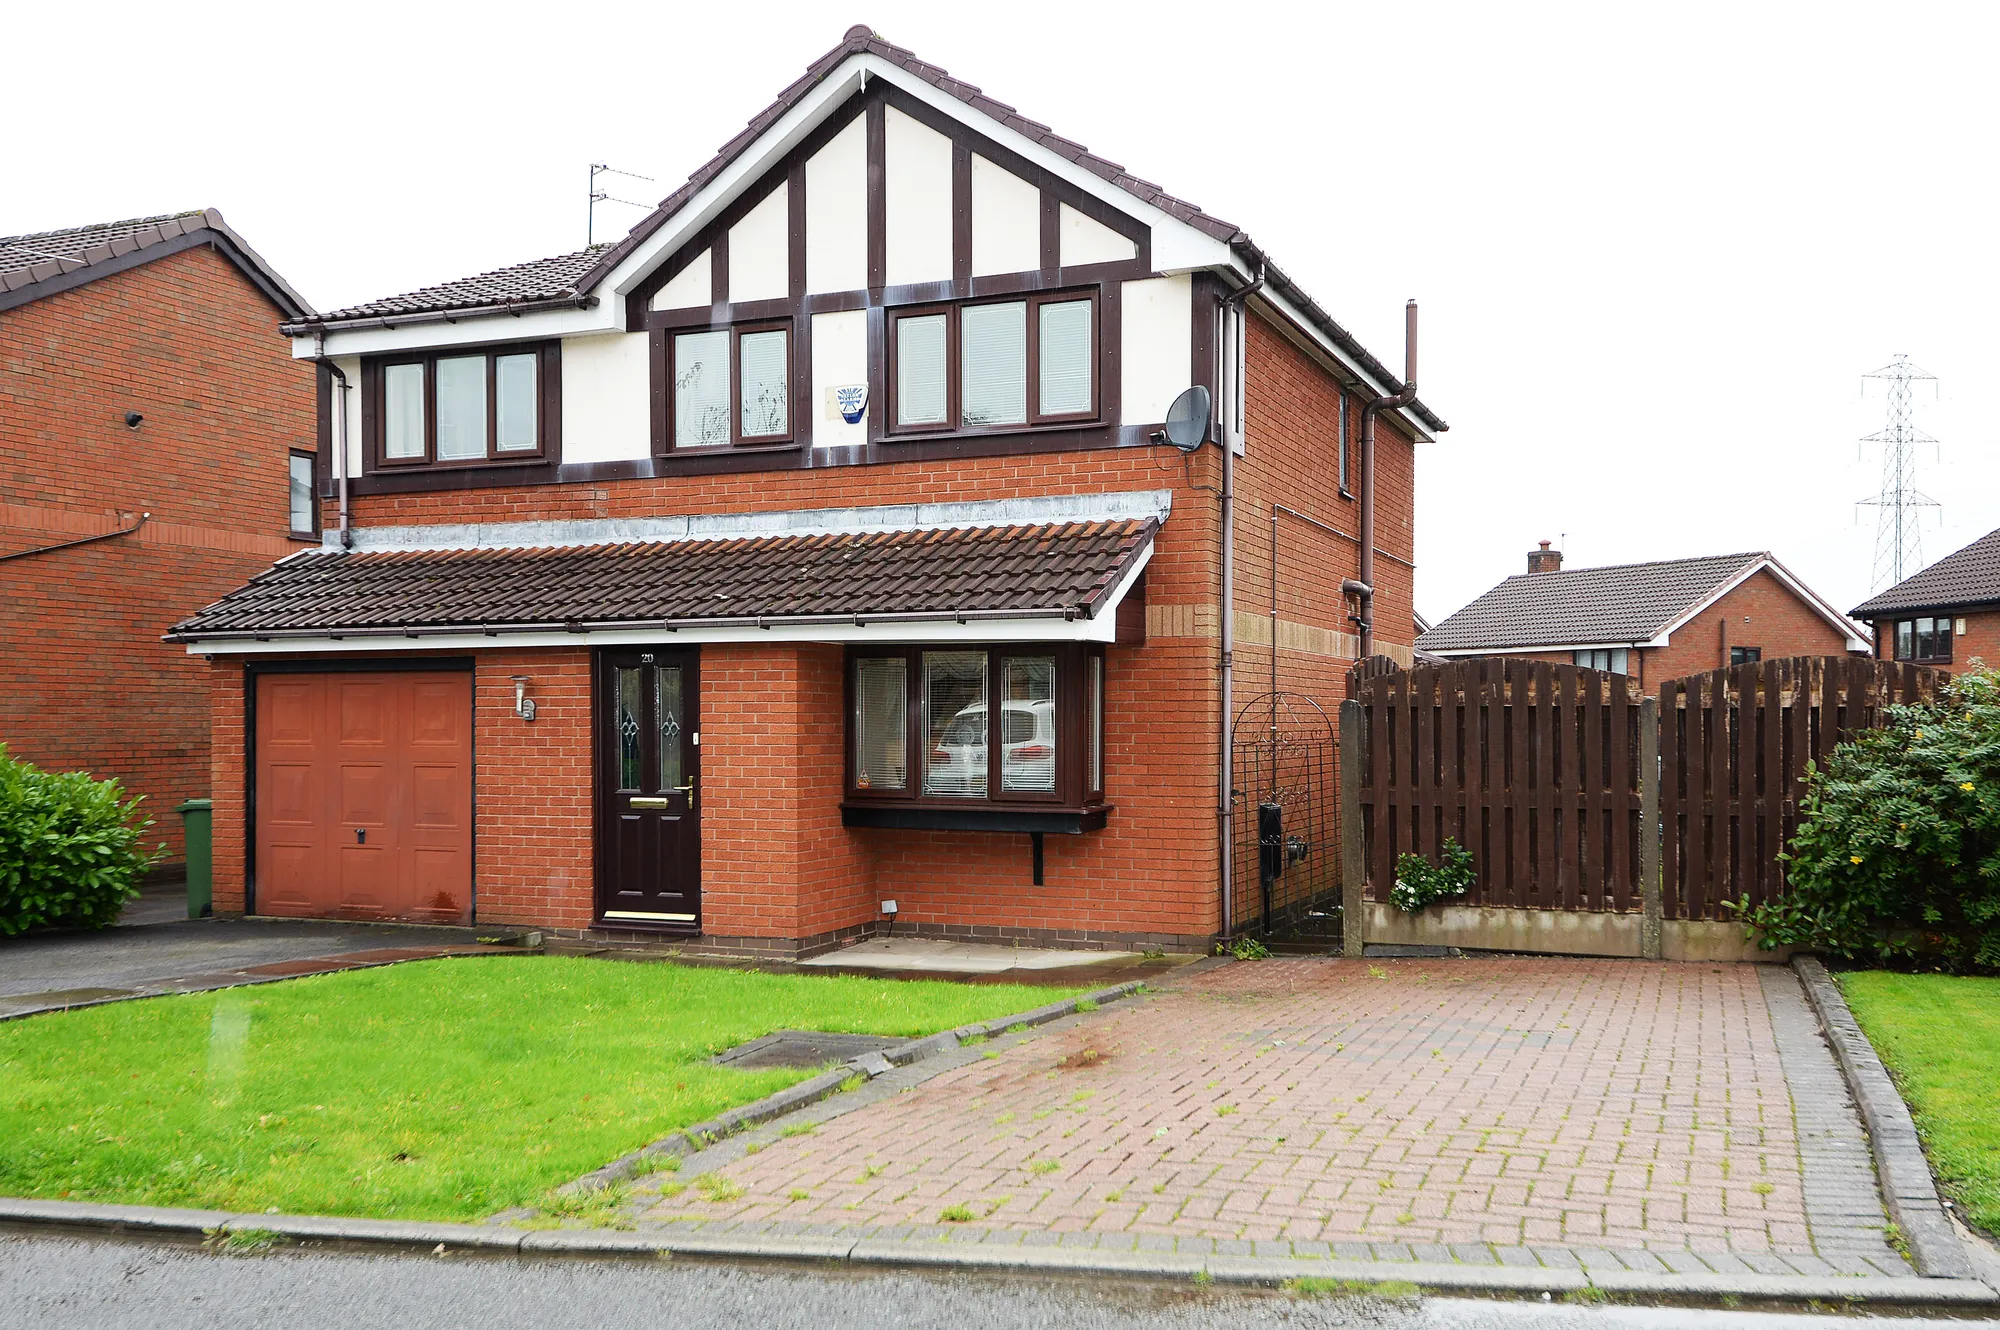 4 bed detached house for sale in Belfairs Close, Ashton-Under-Lyne - Property Image 1